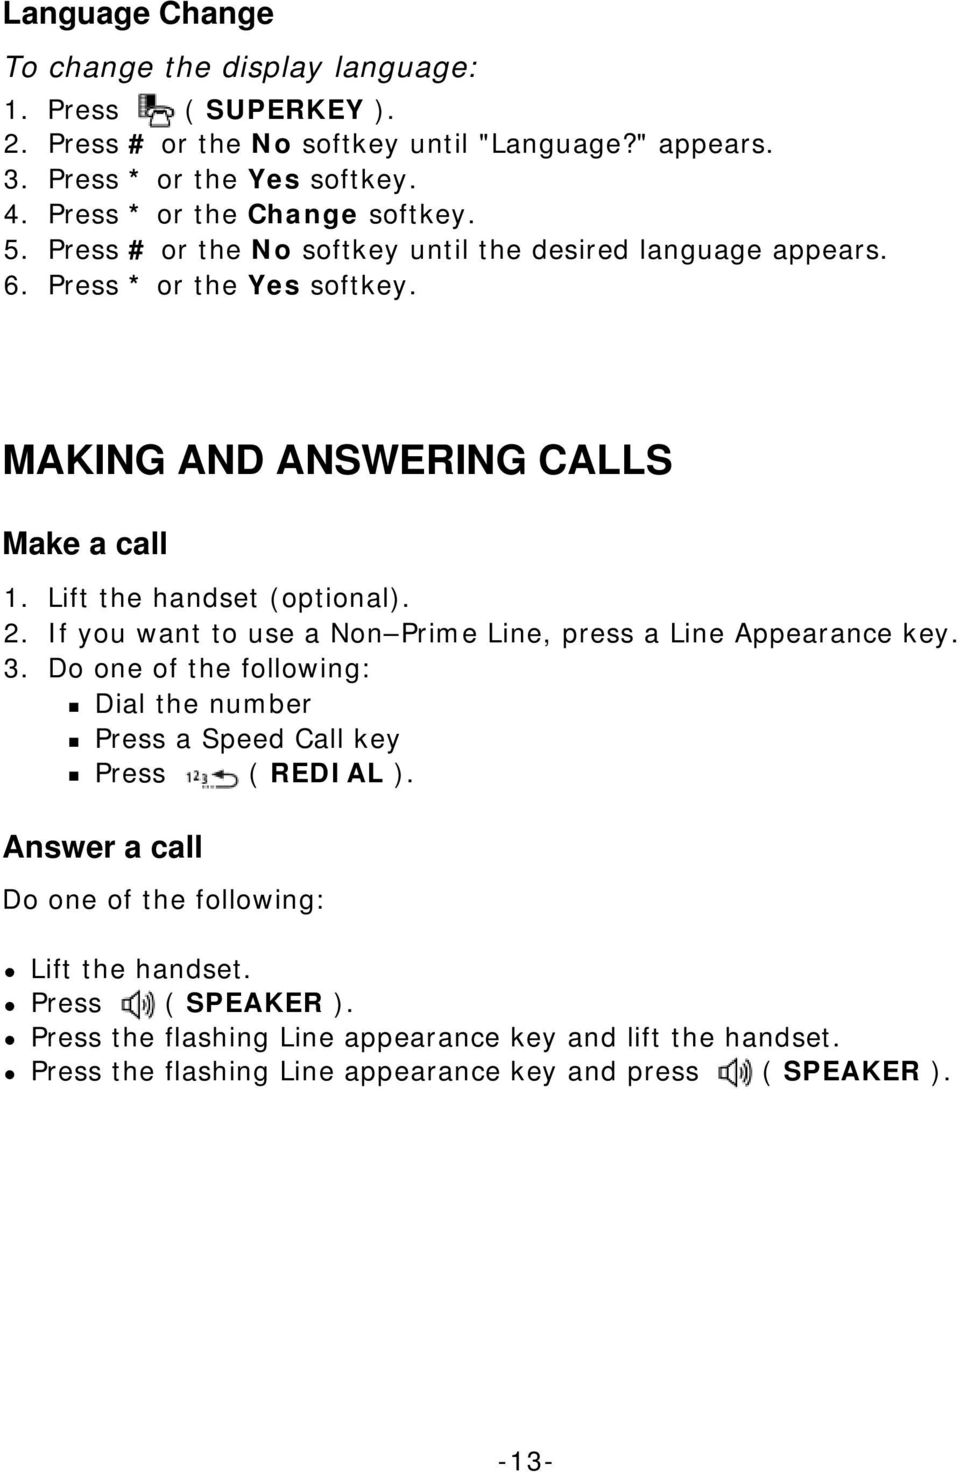 Lift the handset (optional). 2. If you want to use a Non Prime Line, press a Line Appearance key. 3.